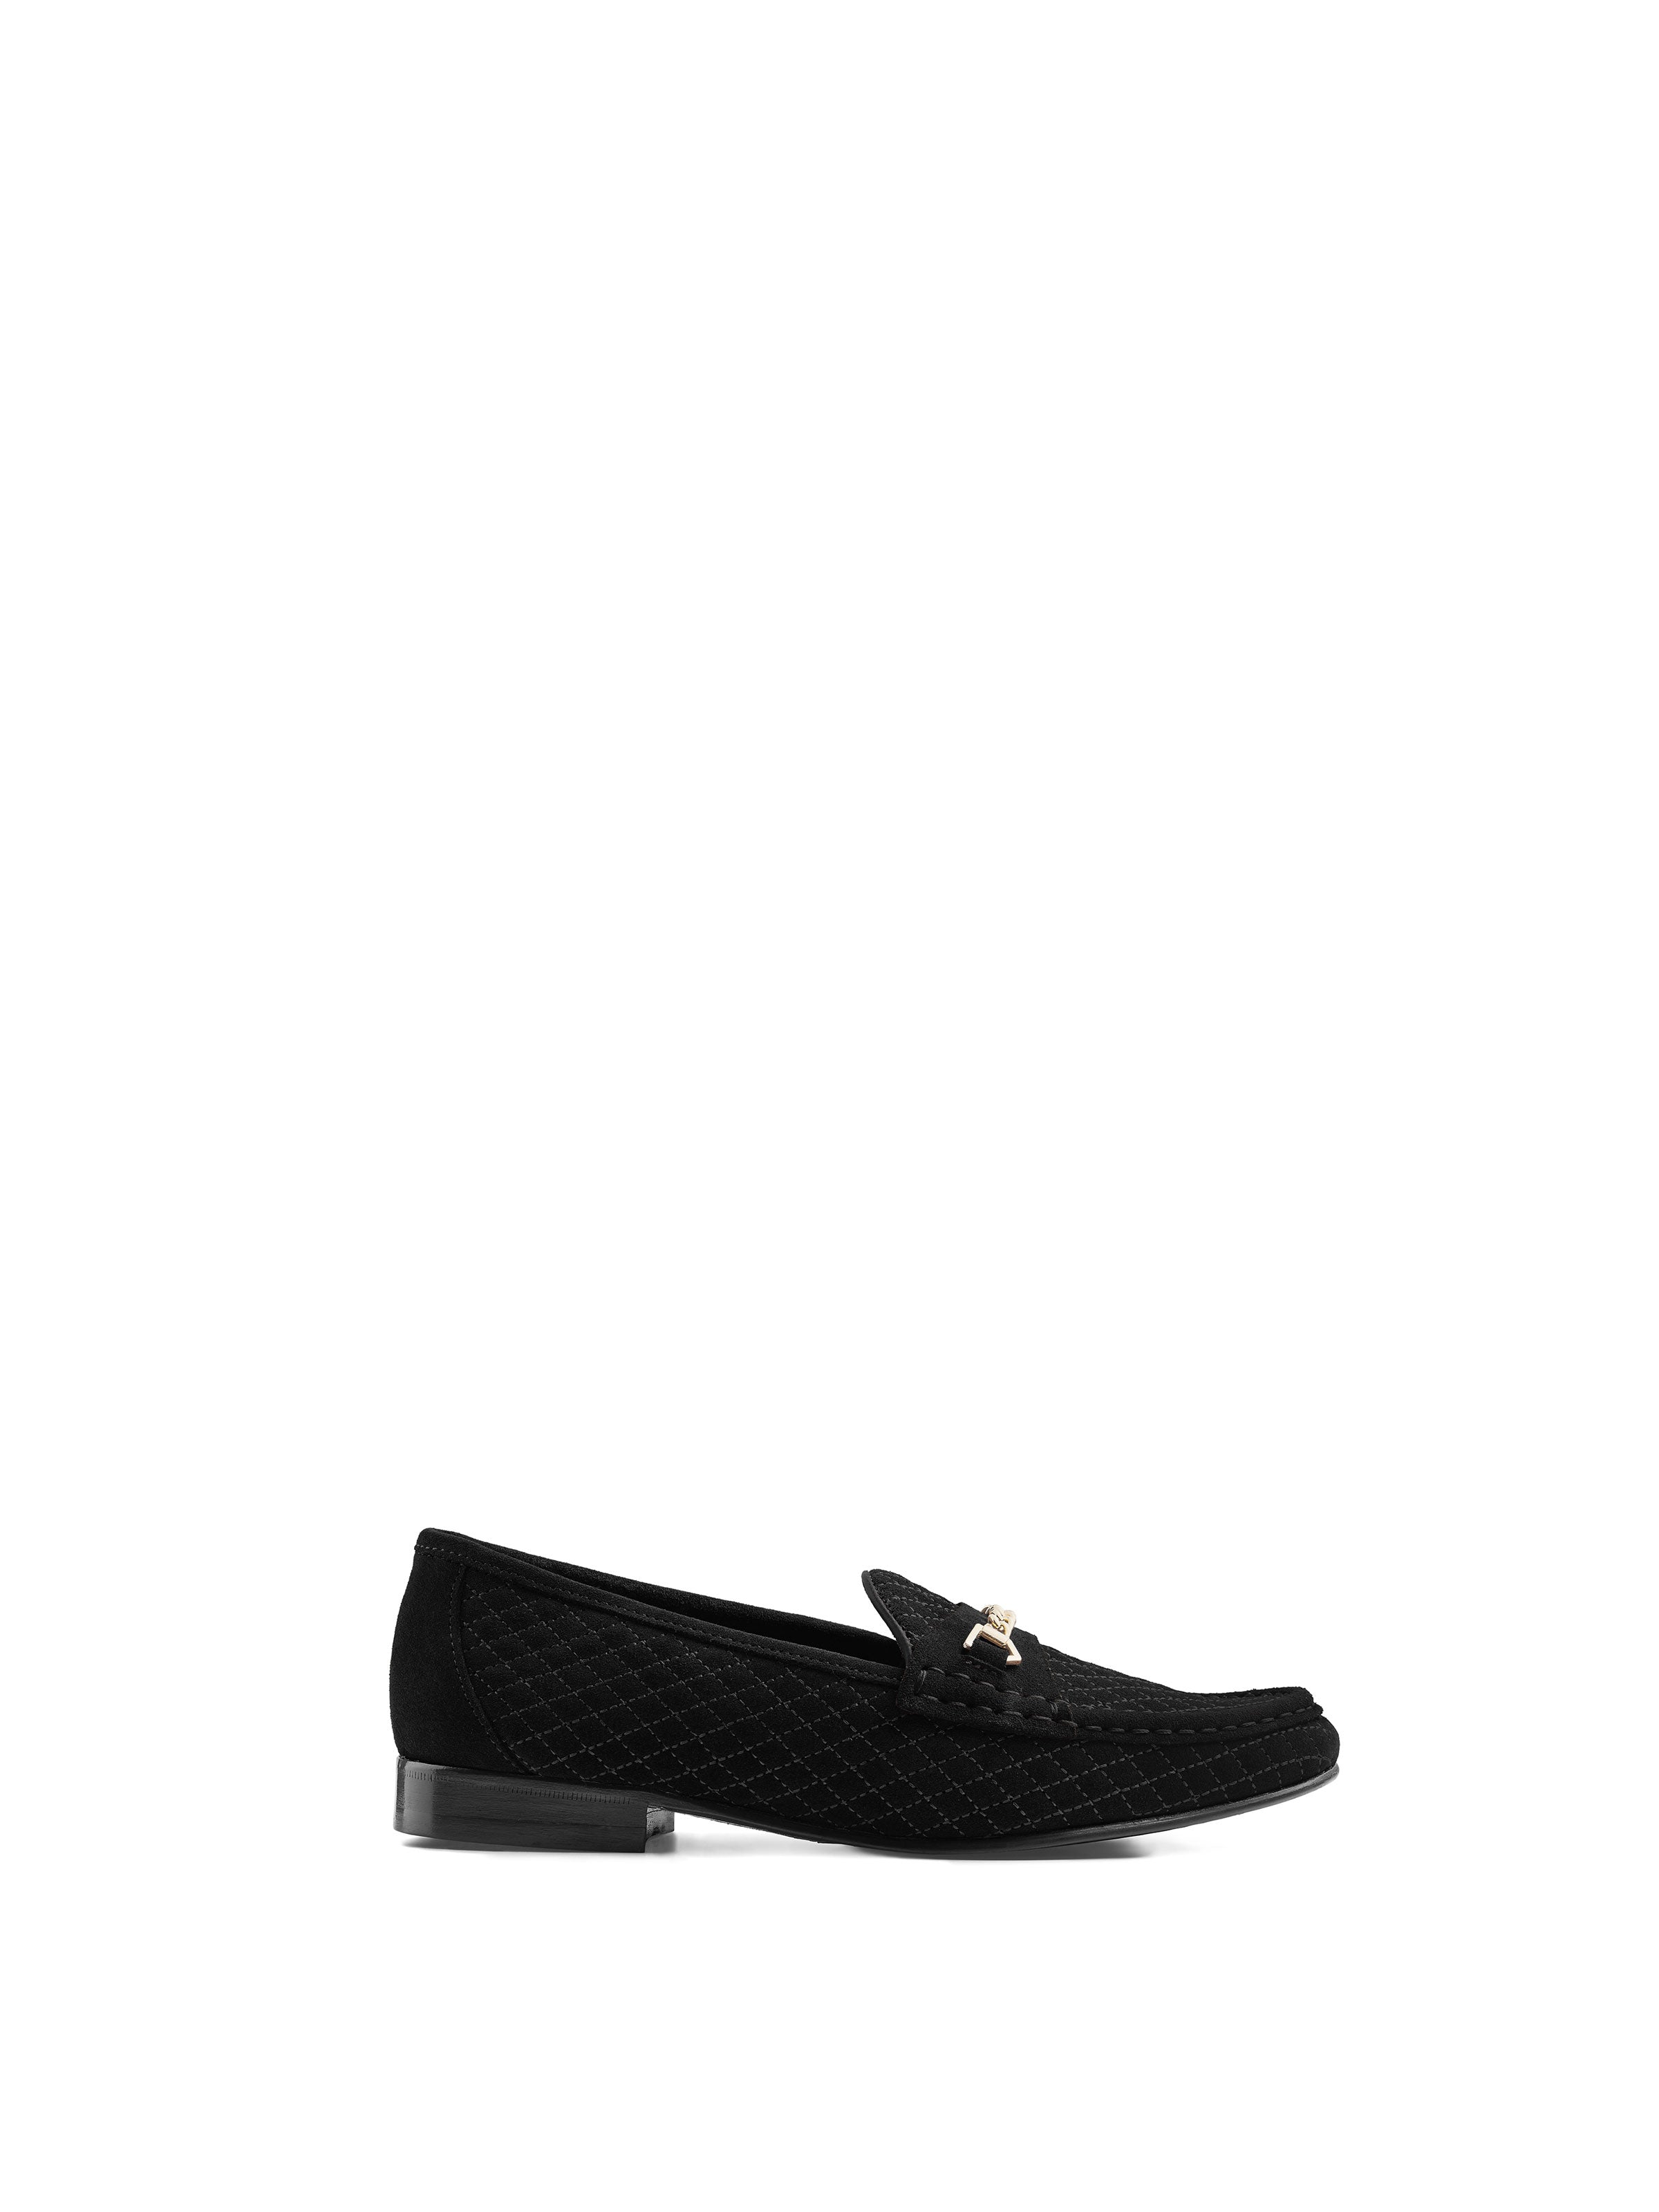 Quilted Apsley - Women's Loafer - Black Suede | Fairfax & Favor